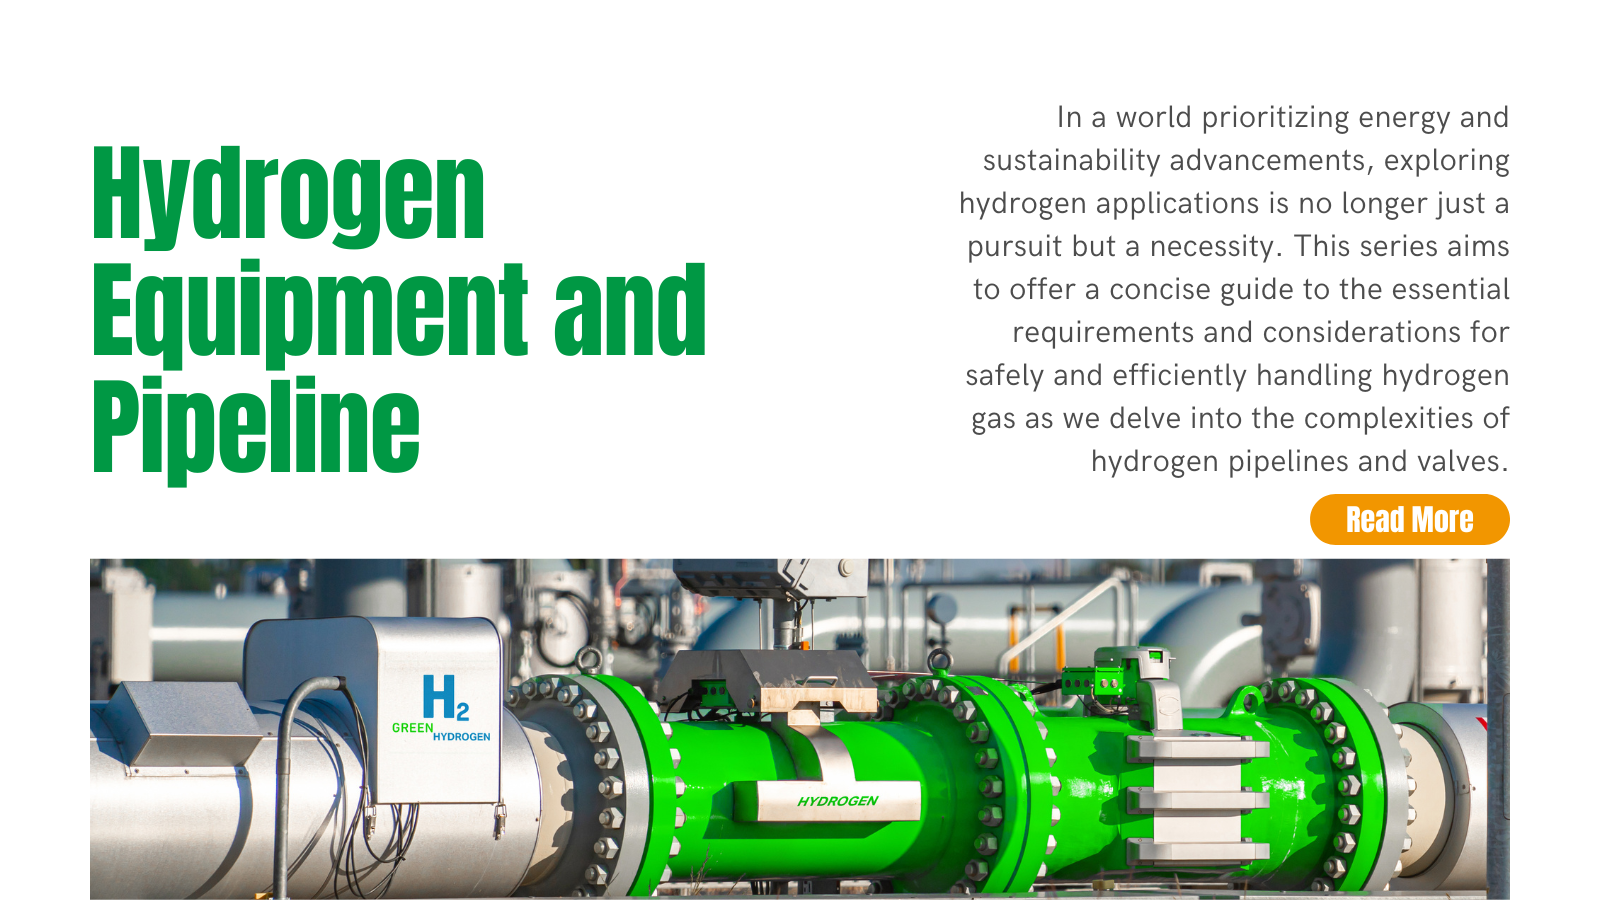 Requirements for Hydrogen Pipelines and Valves (Part 2) - Hydrogen Equipment and Pipeline | INOX-TEK